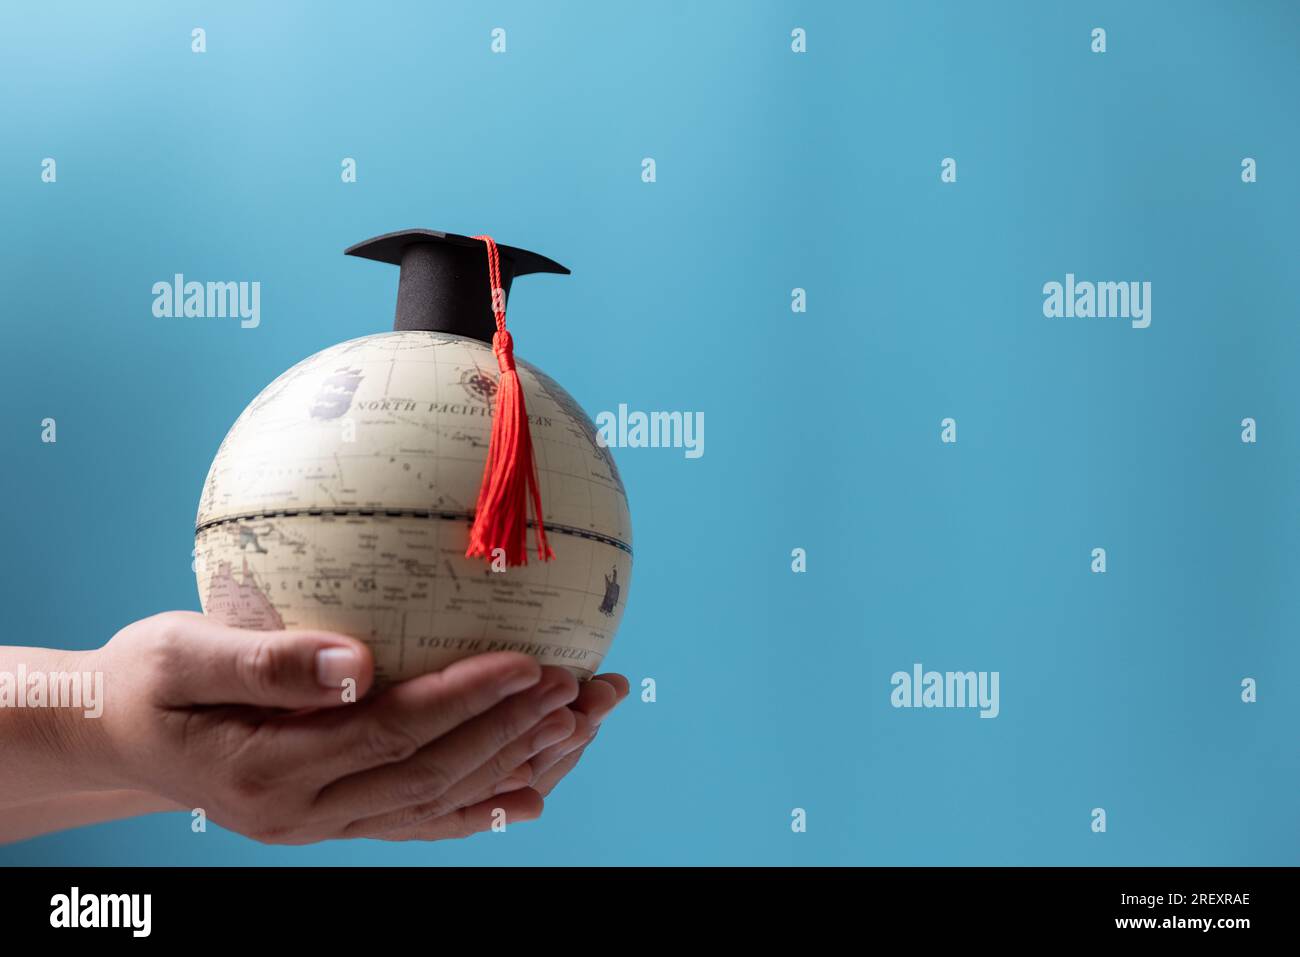 Graduation cap with Earth globe. Concept of global business study, abroad educational, Back to School, Study abroad business in universities. Elements Stock Photo